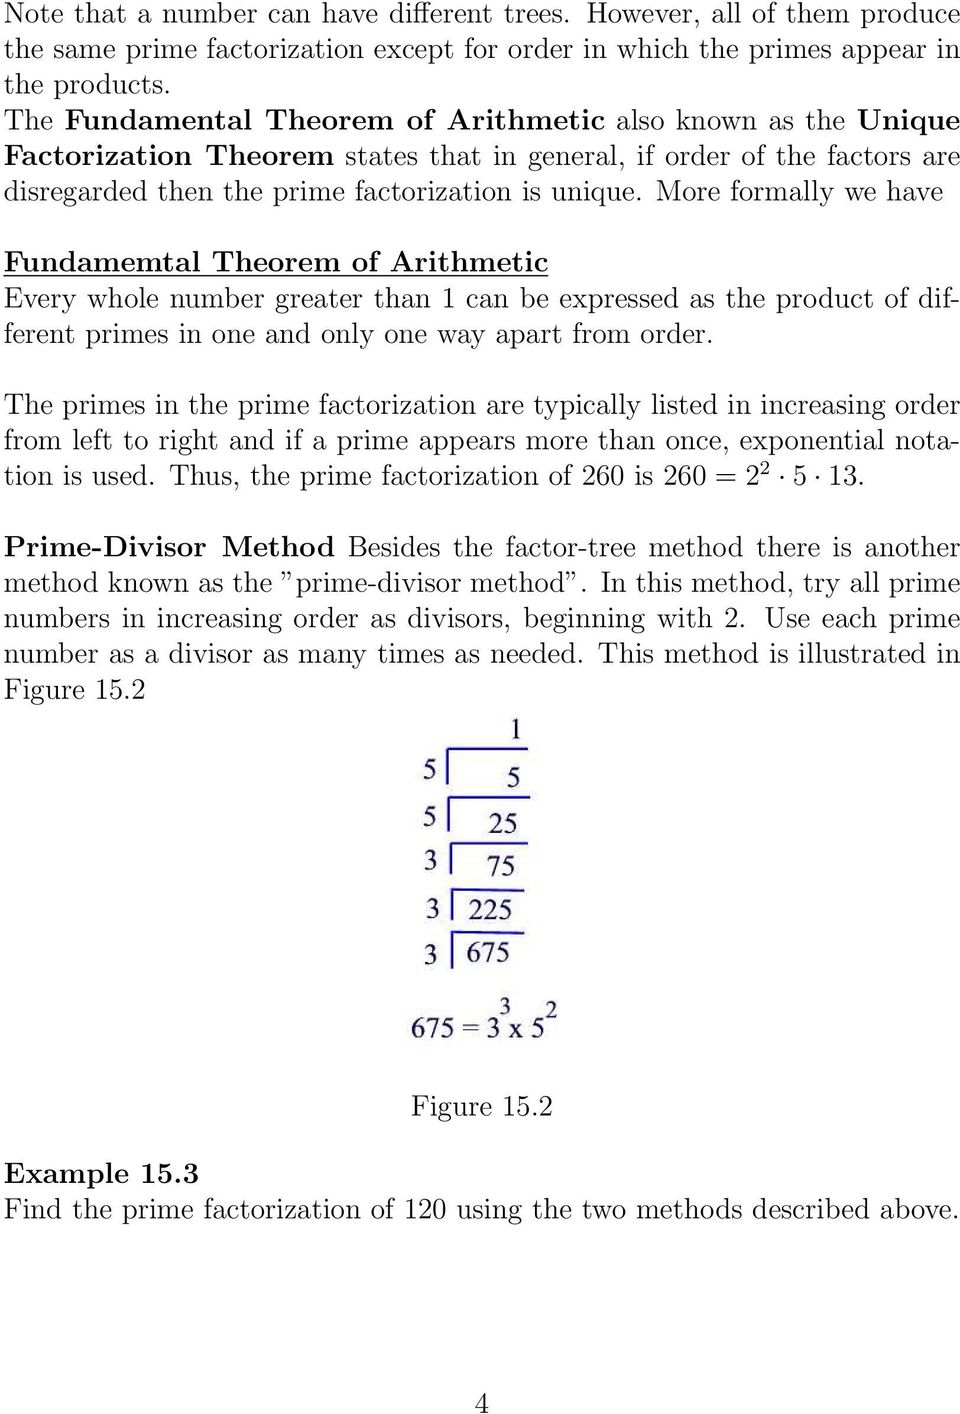 More formally we have Fundamemtal Theorem of Arithmetic Every whole number greater than 1 can be expressed as the product of different primes in one and only one way apart from order.